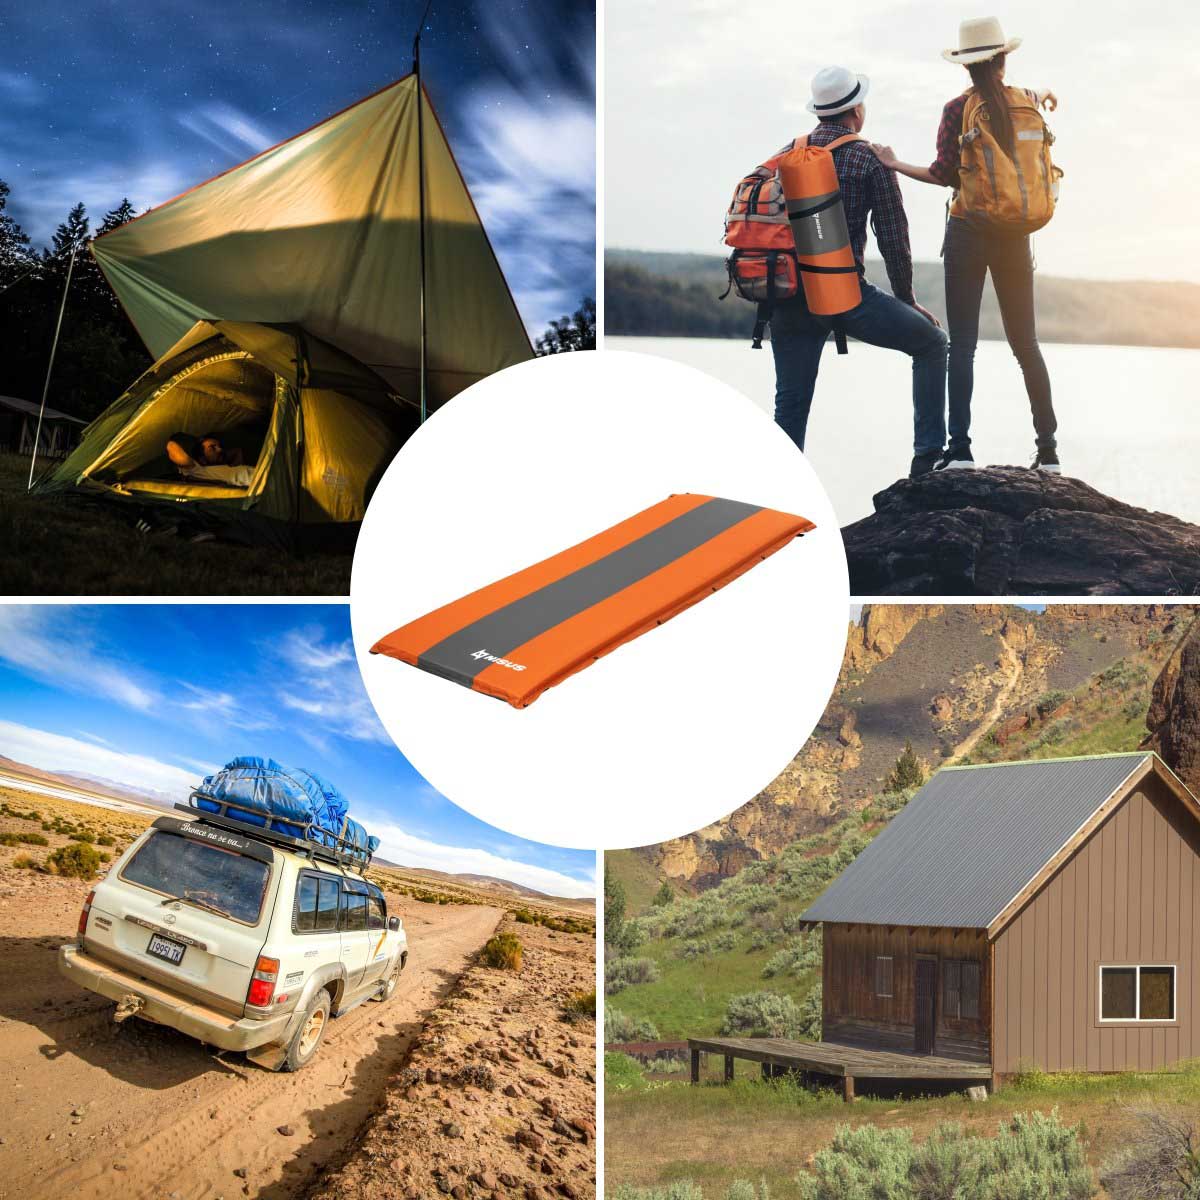 Orange Self Inflating Sleeping Pad is lightweight and compact, perfect for outdoor trips